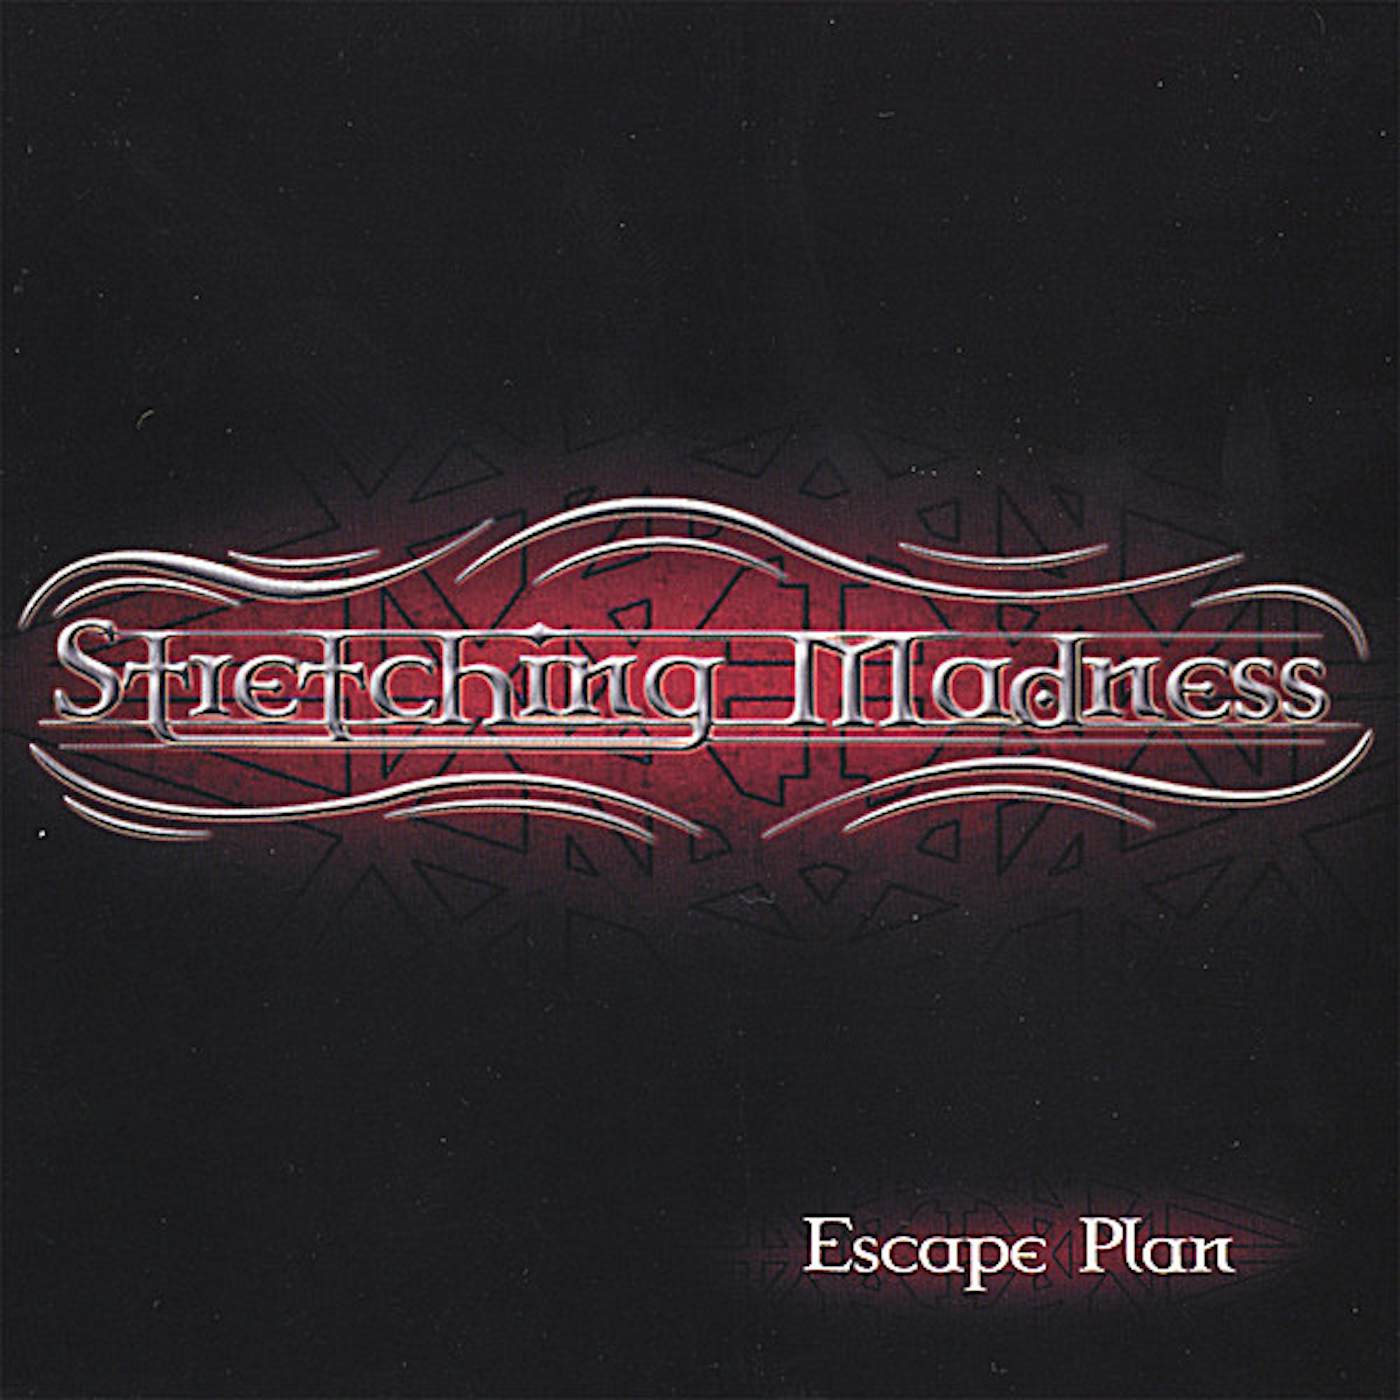 Stretching Madness ESCAPE PLAN CD